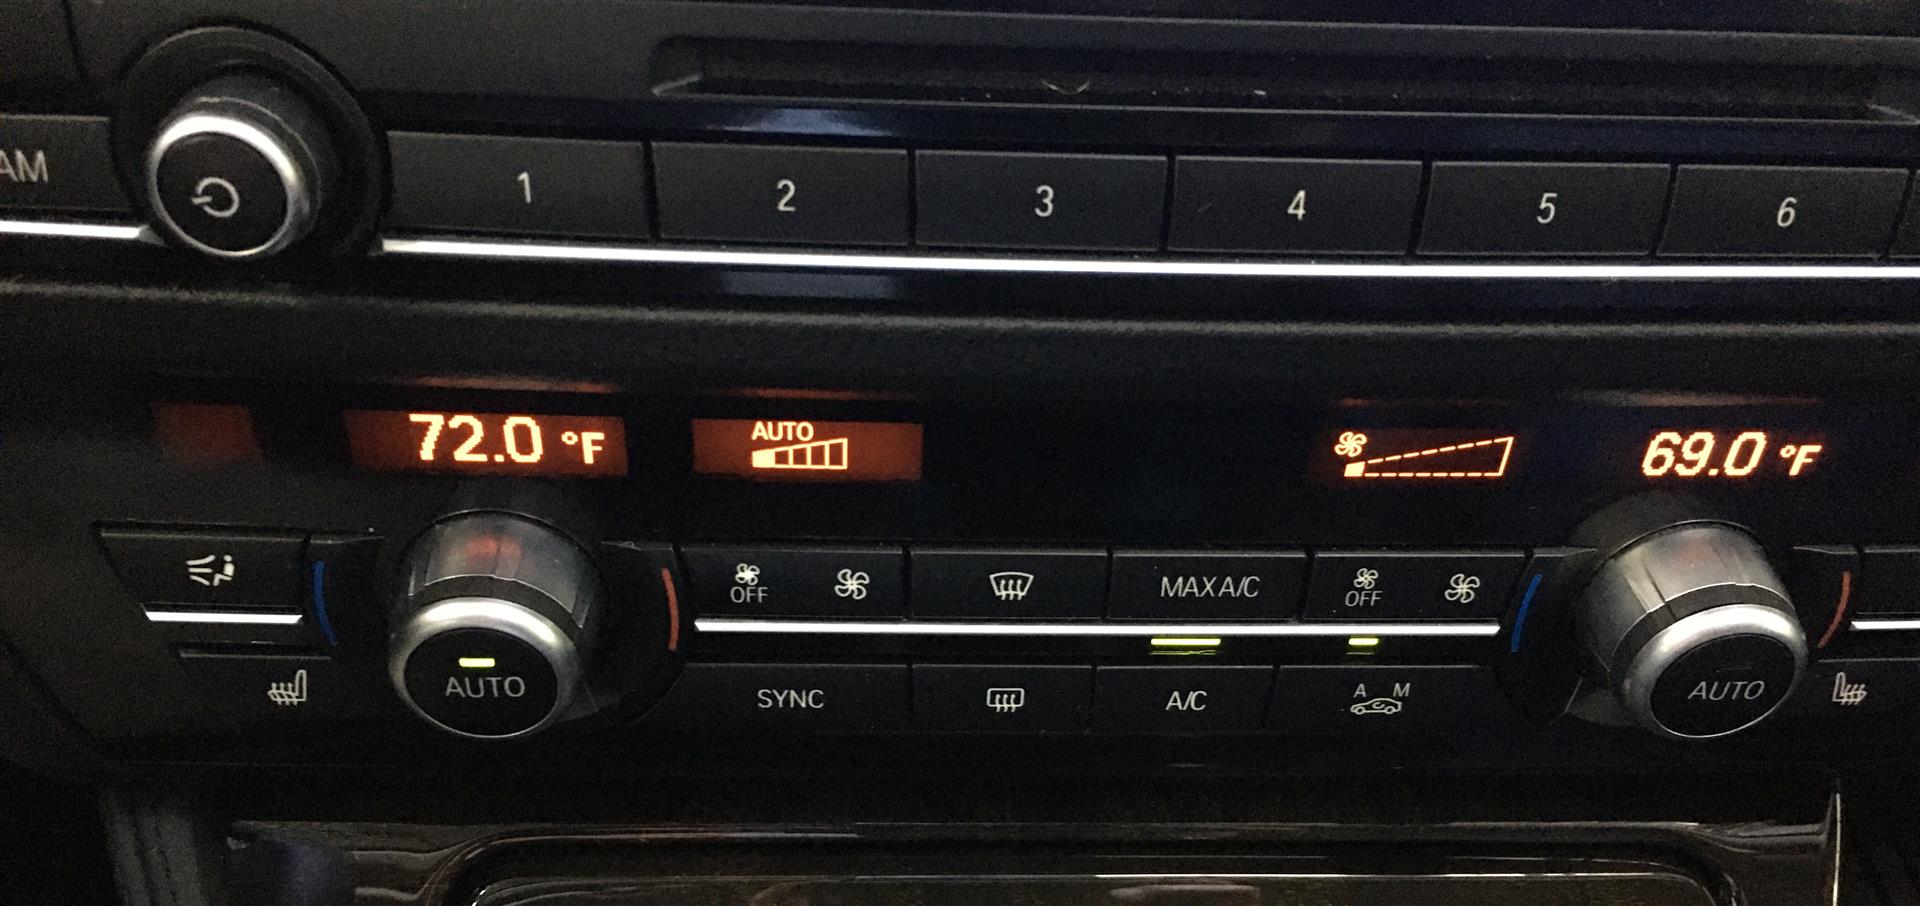 3 Most Common Reasons Why Your BMW’s AC Isn’t Working